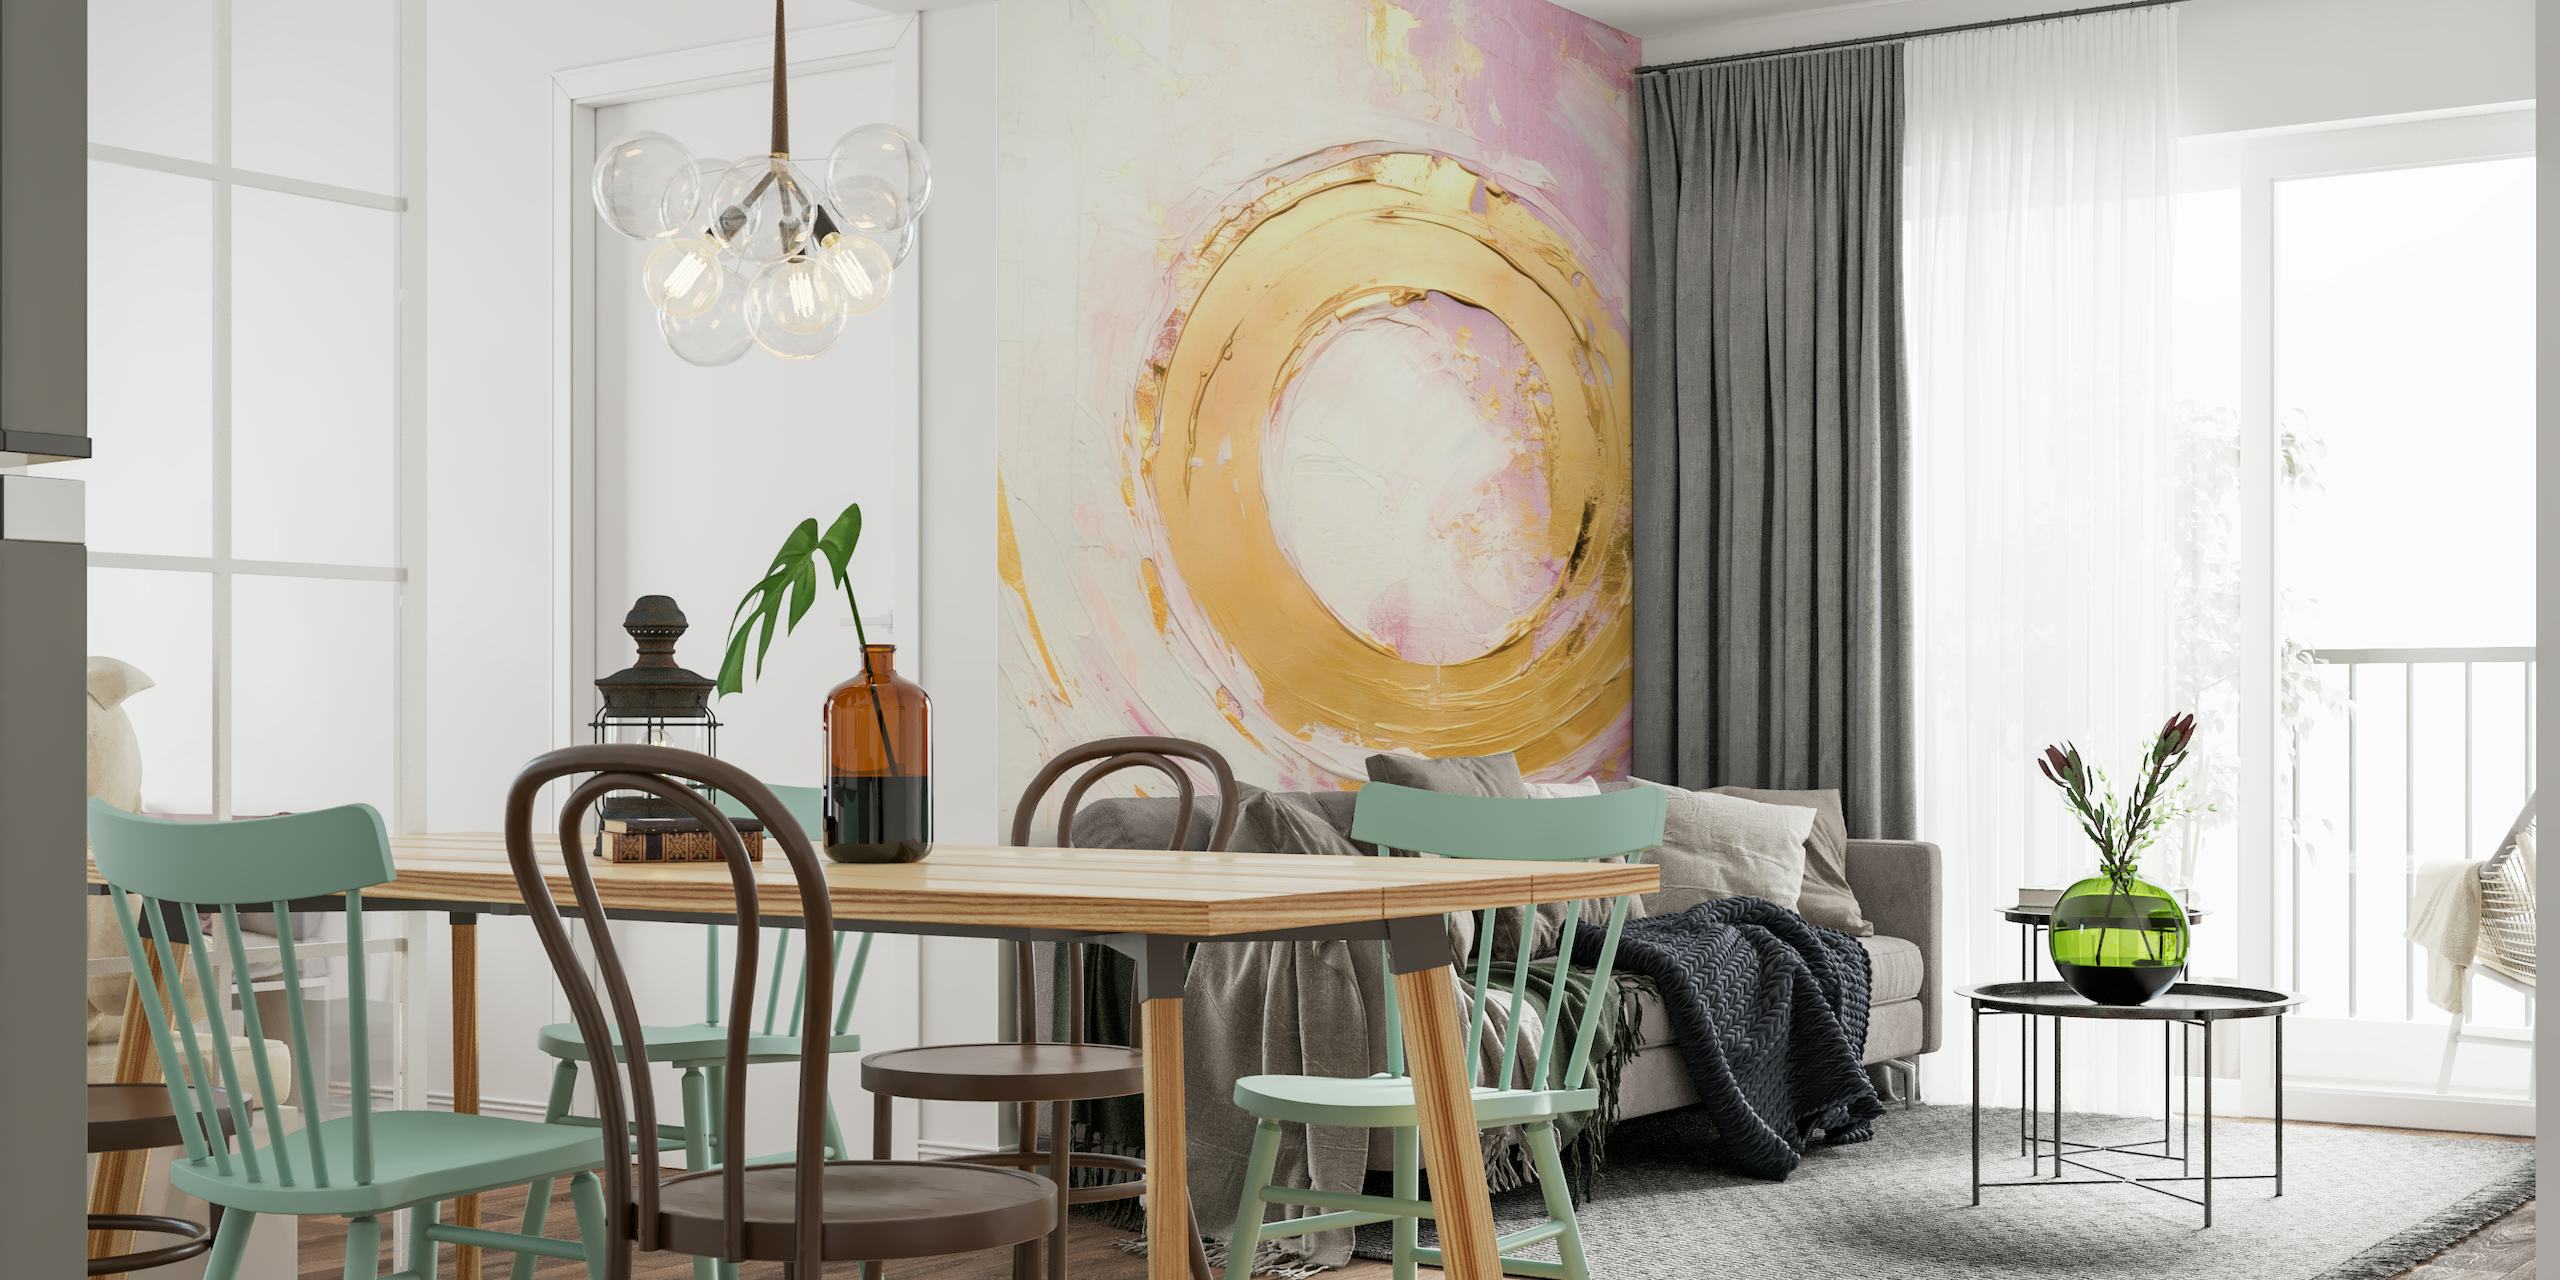 Abstract Art Awakening wall mural with pink and golden swirls